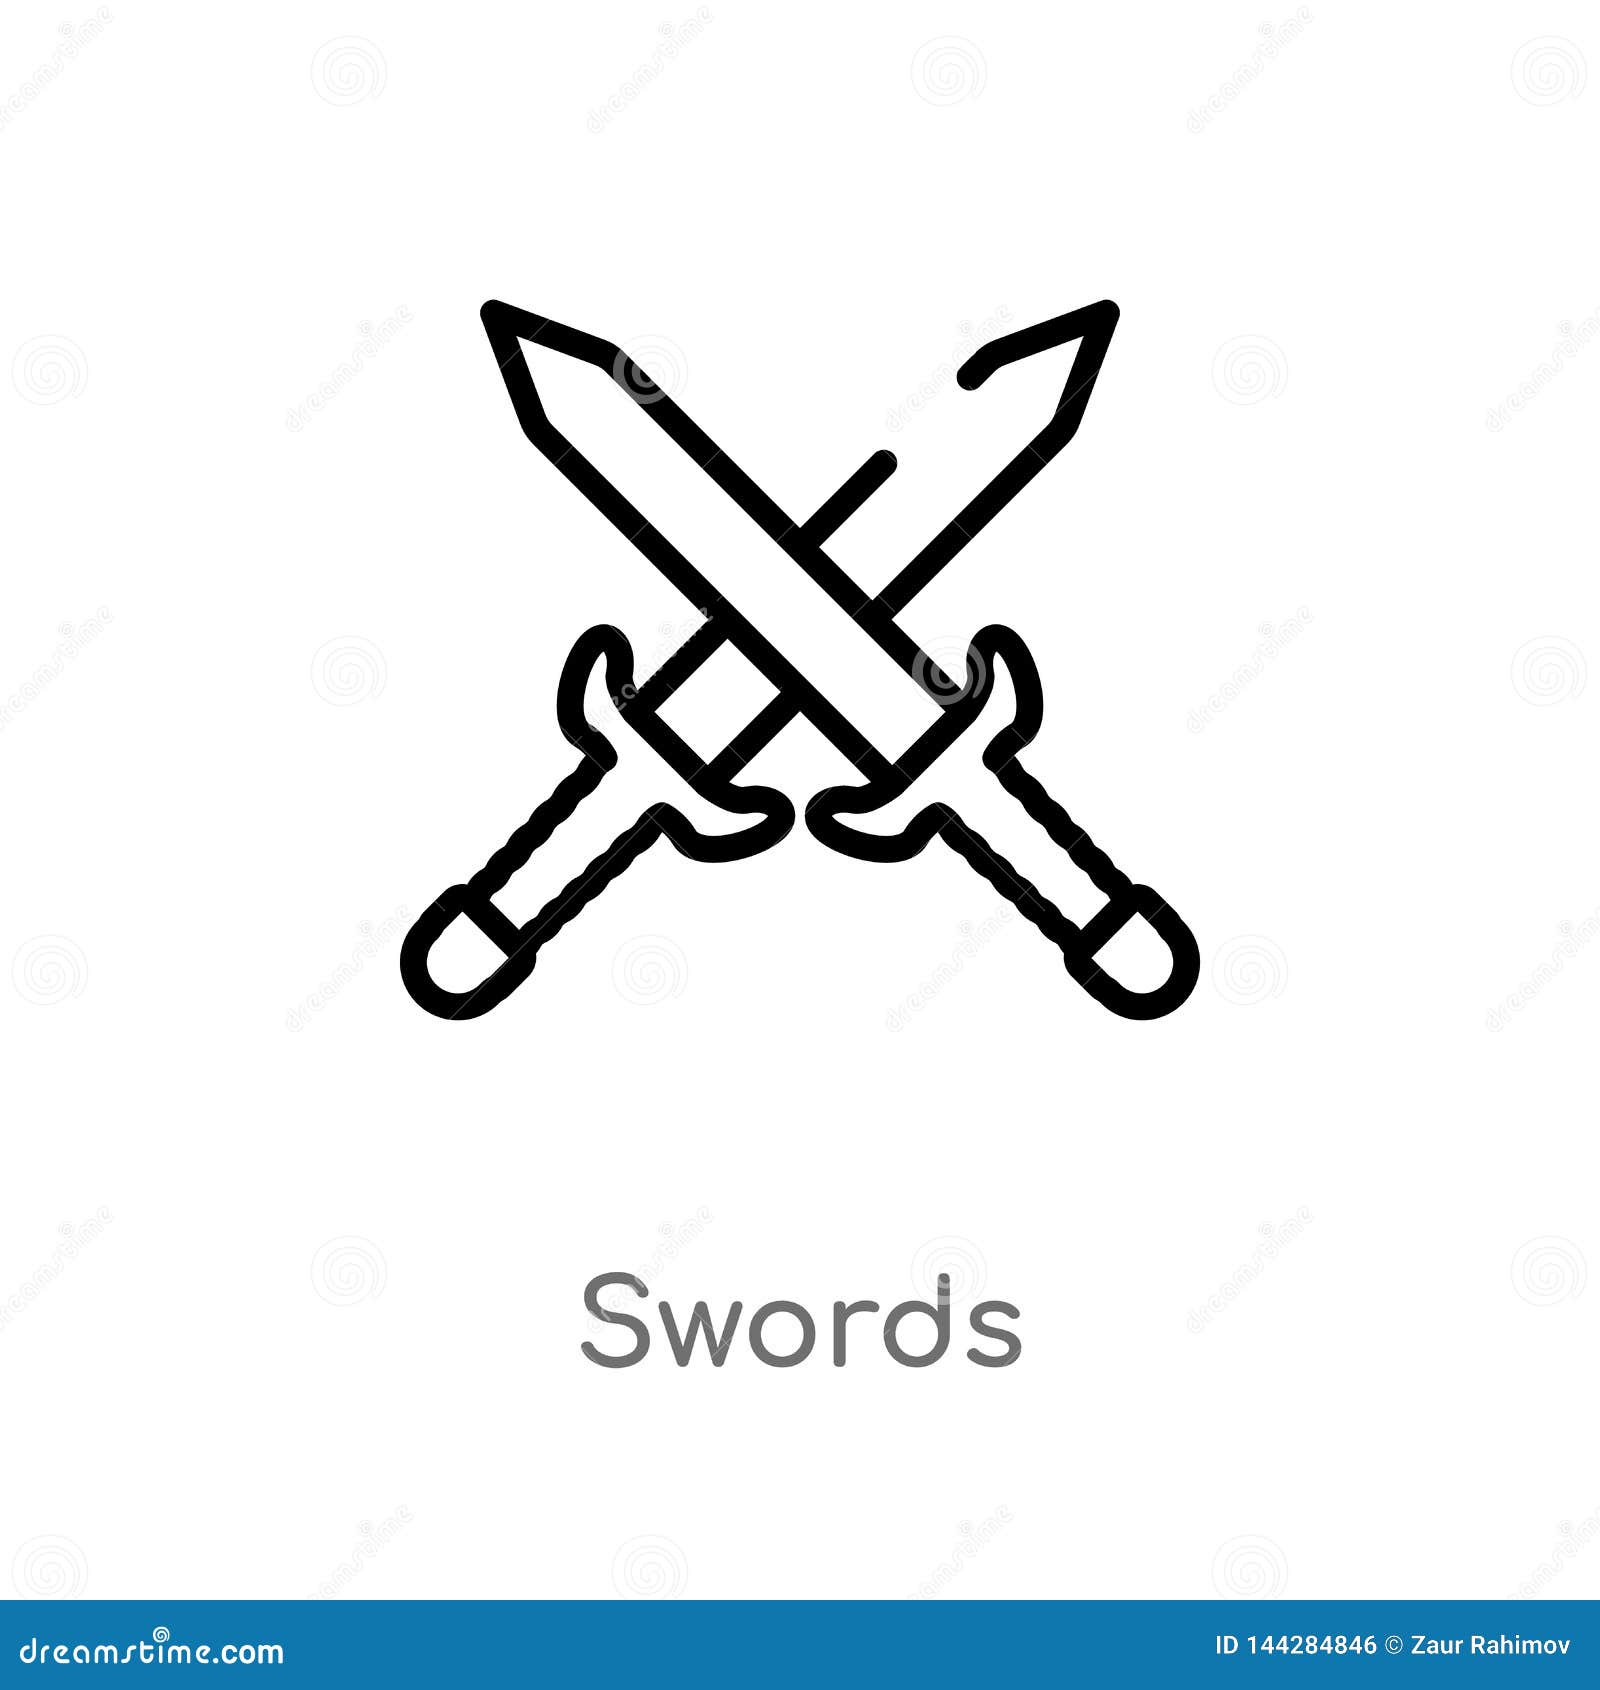 Two crossed swords hand drawn outline doodle icon., Stock vector